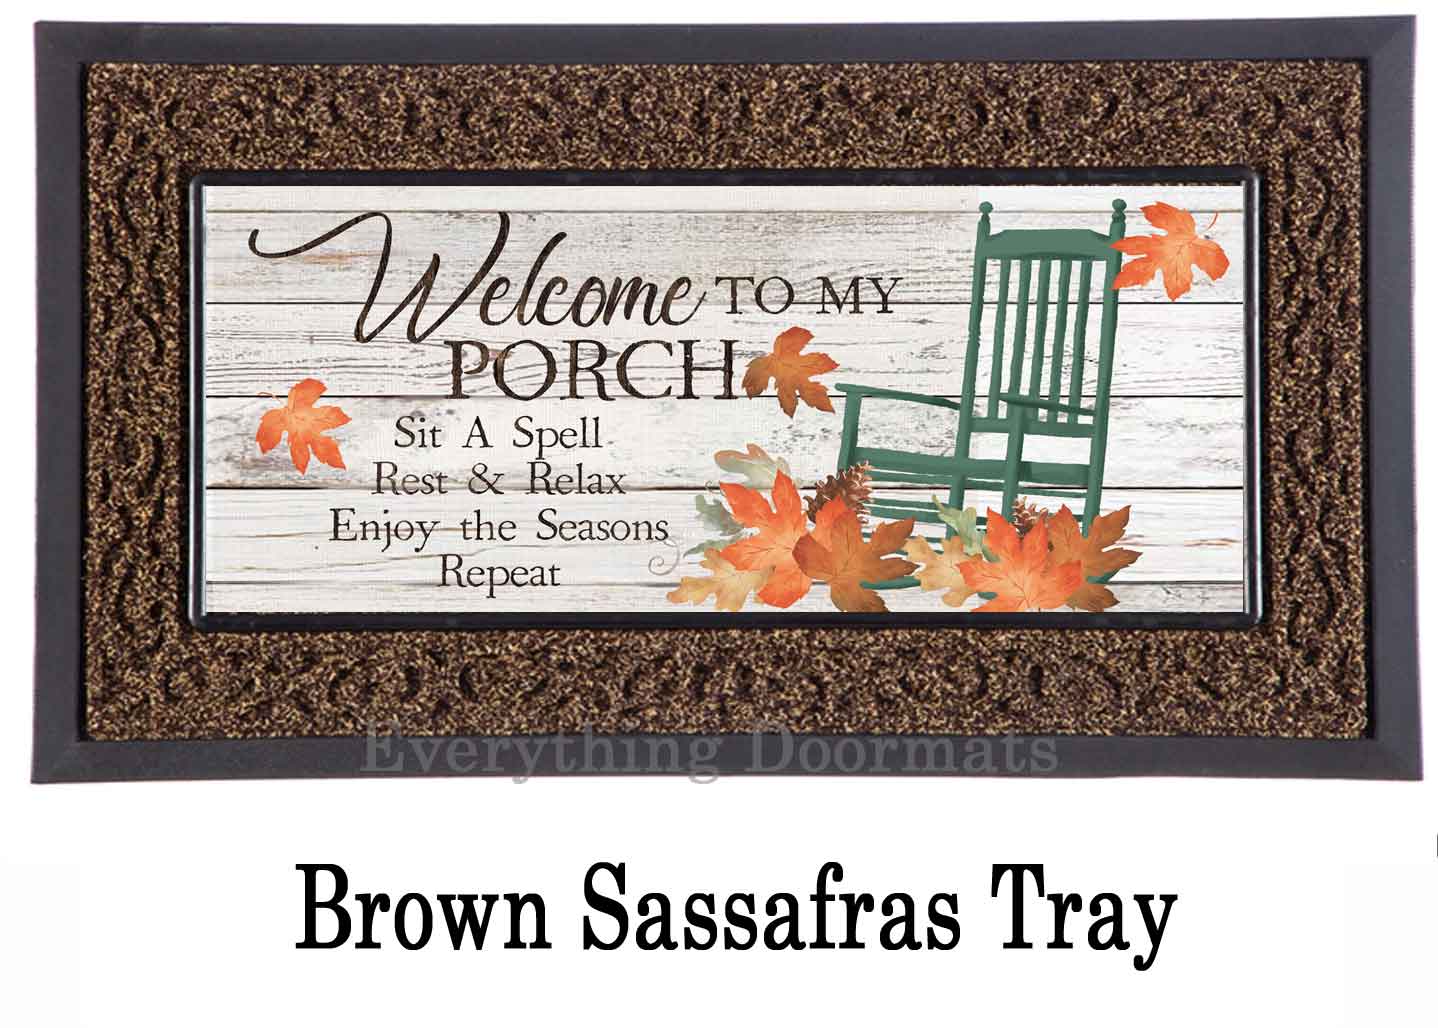 https://www.everythingdoormats.com/images/products/fall-porch-rules-welcome-sassafras-switch-insert-doormat-in-brown-insert-tray.jpg